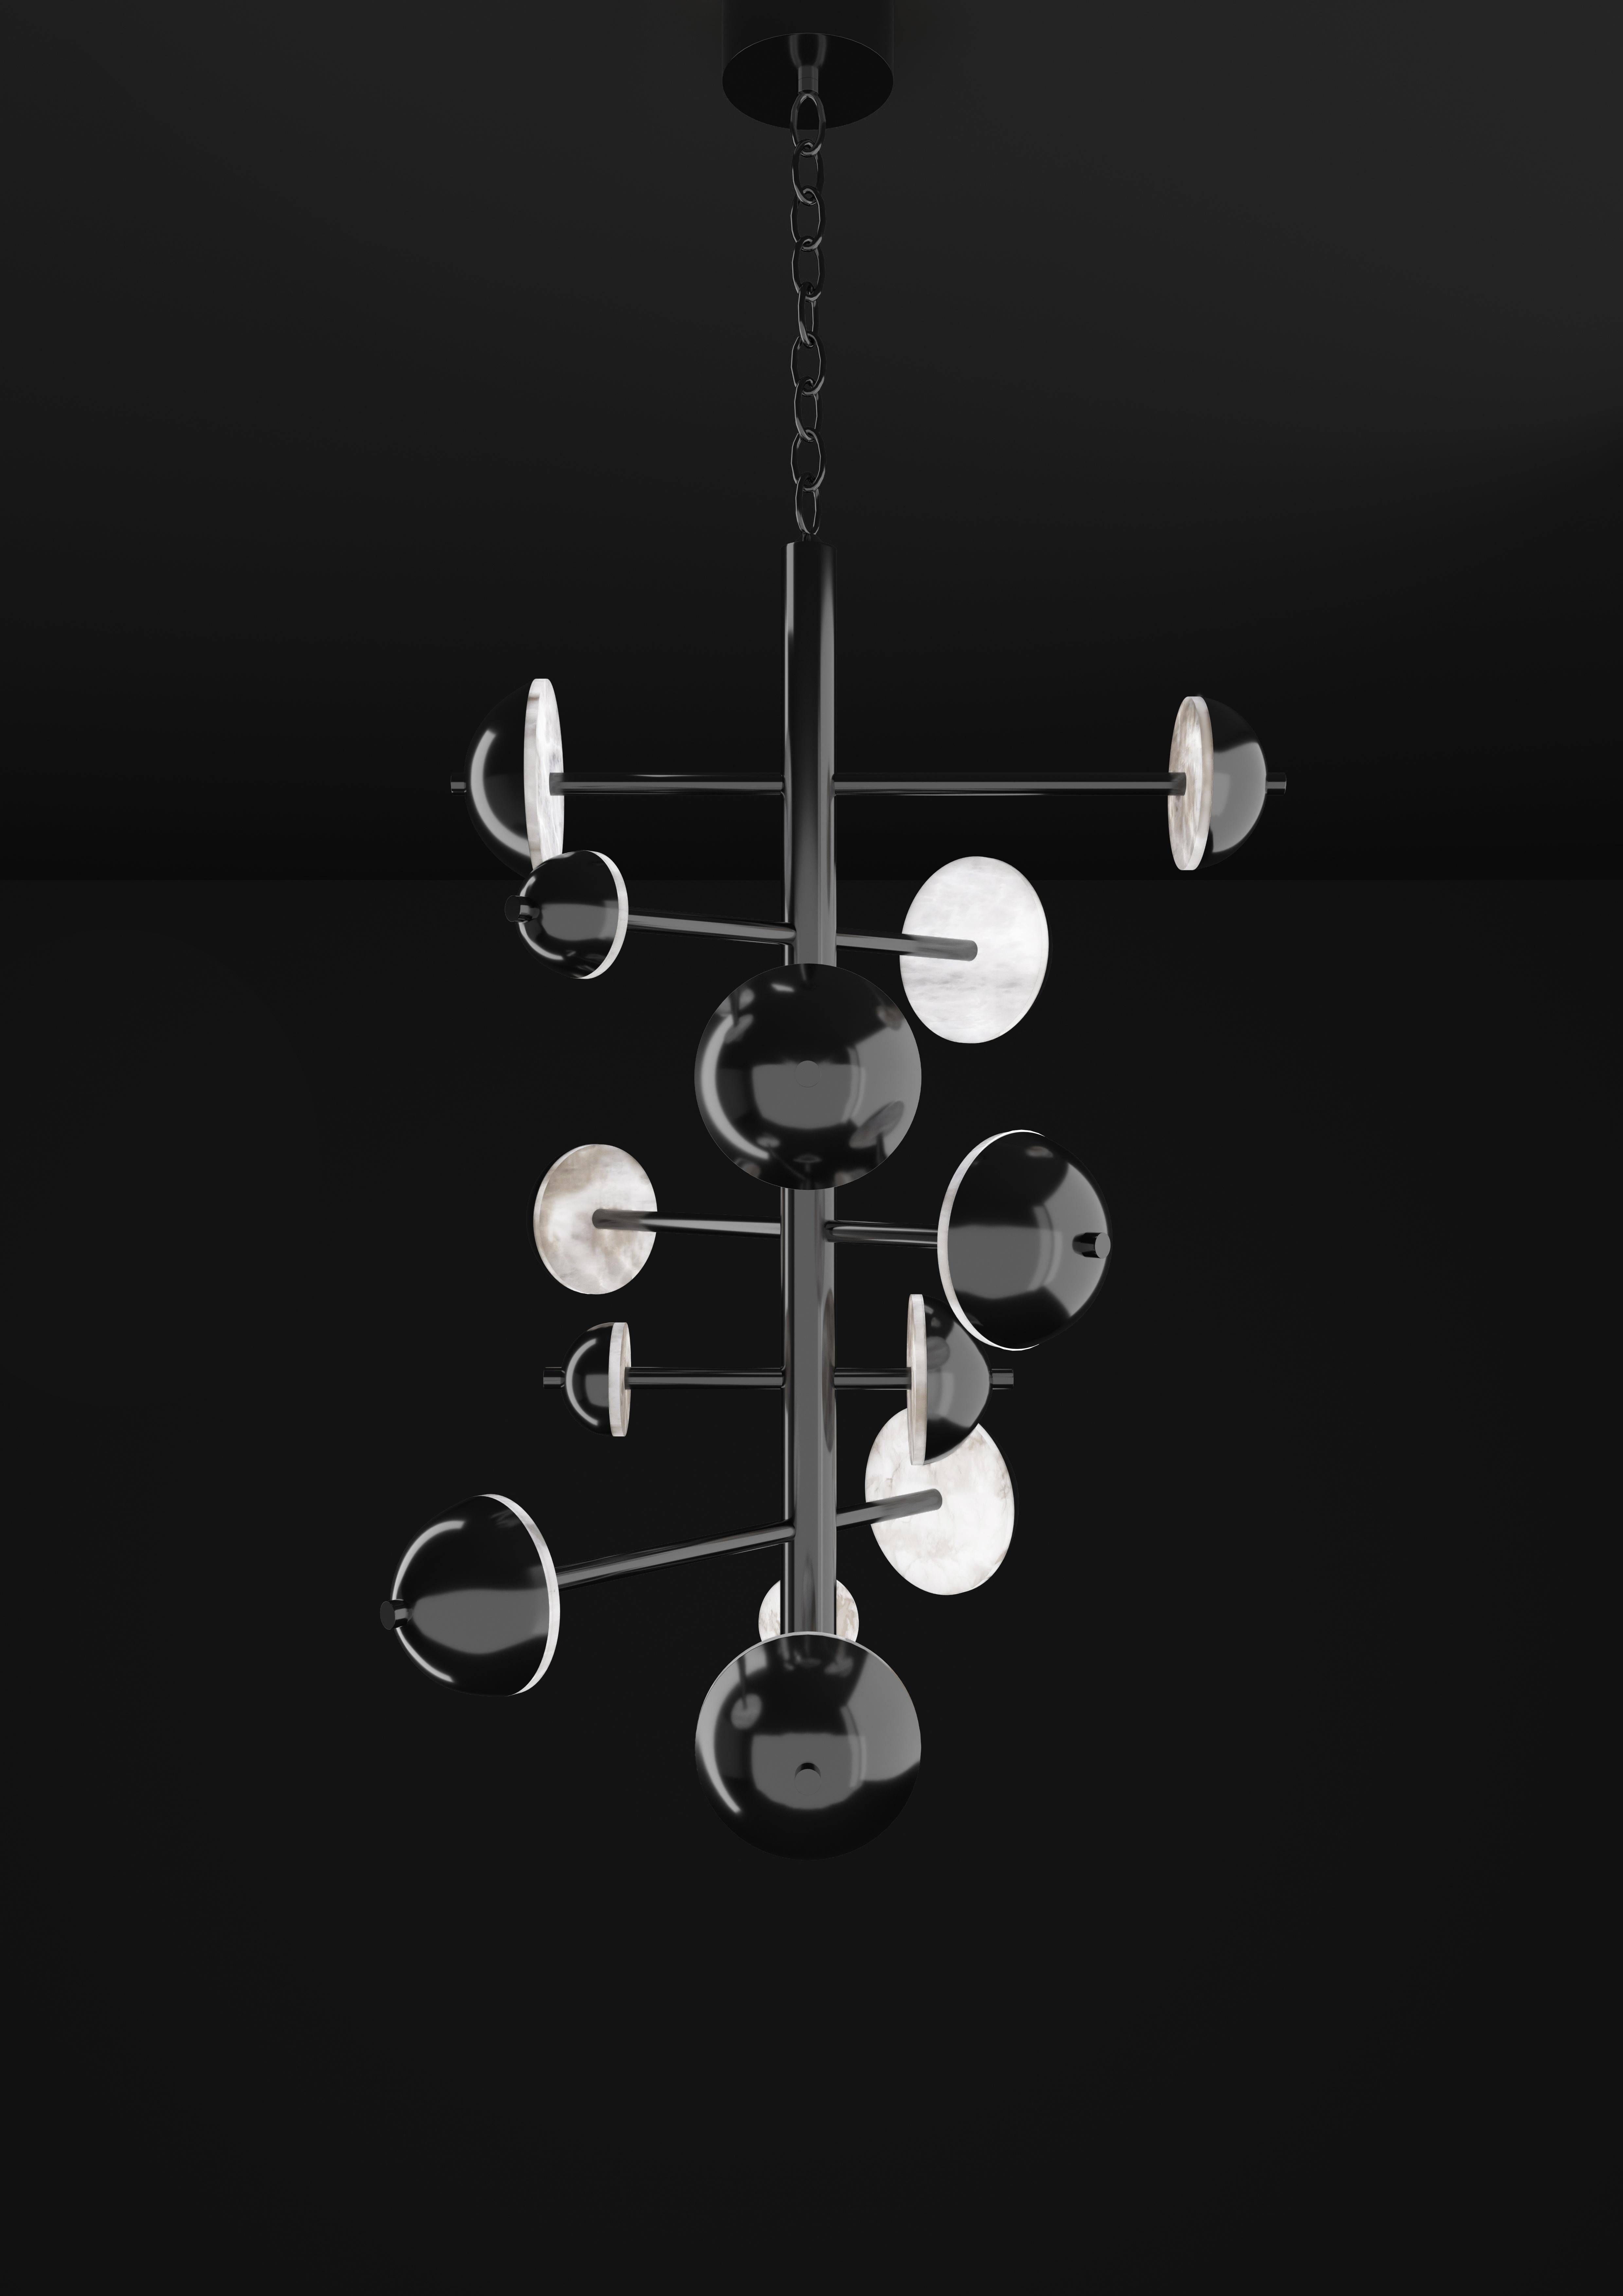 Ares Shiny Black Metal Chandelier by Alabastro Italiano
Dimensions: D 74,5 x W 73 x H 110 cm.
Materials: White alabaster and metal.

Available in different finishes: Shiny Silver, Bronze, Brushed Brass, Ruggine of Florence, Brushed Burnished, Shiny